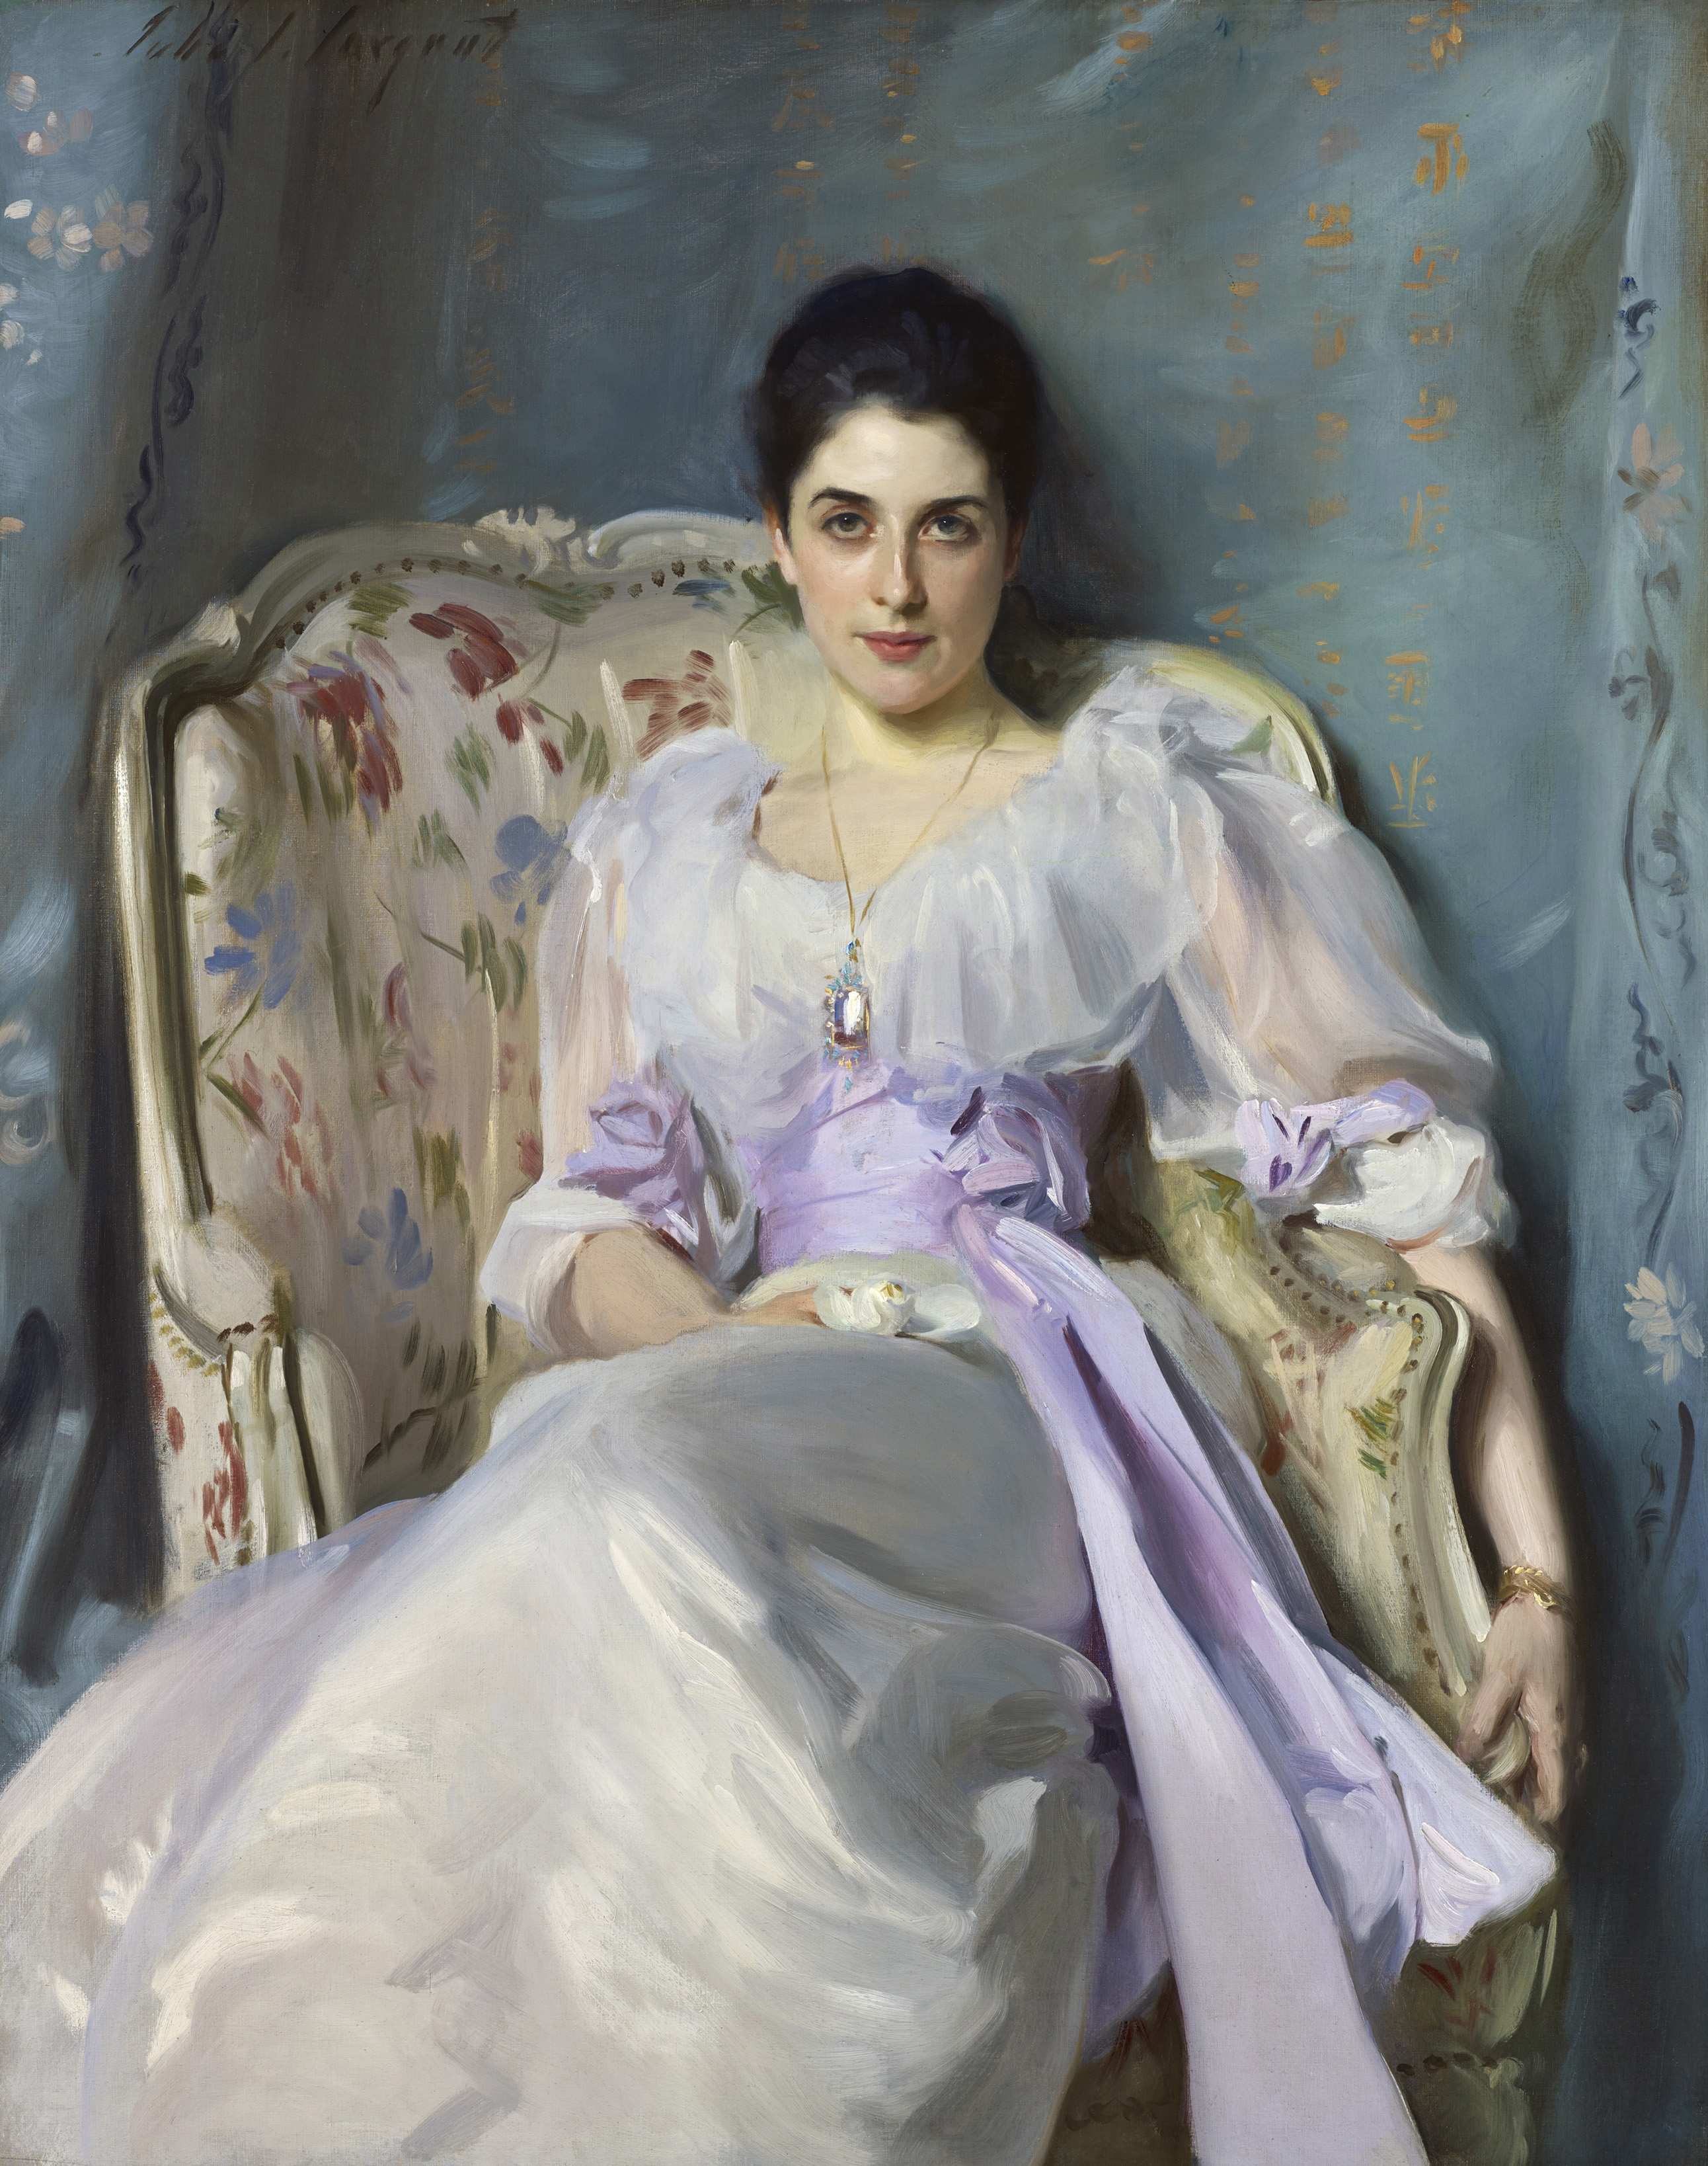 John Singer Sargent Lady Agnew of Lochnaw 1892 oil on canvas 125.7 x 100.3 cm Scottish National Gallery, Edinburgh © Trustees of the National Galleries of Scotland ***This image may only be used in conjunction with editorial coverage of The Greats exhibition, 24 Oct 2015 - 14 Feb 2016, at the Art Gallery of New South Wales. This image may not be cropped or overwritten. Prior approval in writing required for use as a cover. Caption details must accompany reproduction of the image. *** Media contact: Lisa.Catt@ag.nsw.gov.au *** Local Caption *** ***This image may only be used in conjunction with editorial coverage of The Greats exhibition, 24 Oct 2015 - 14 Feb 2016, at the Art Gallery of New South Wales. This image may not be cropped or overwritten. Prior approval in writing required for use as a cover. Caption details must accompany reproduction of the image. *** Media contact: Lisa.Catt@ag.nsw.gov.au